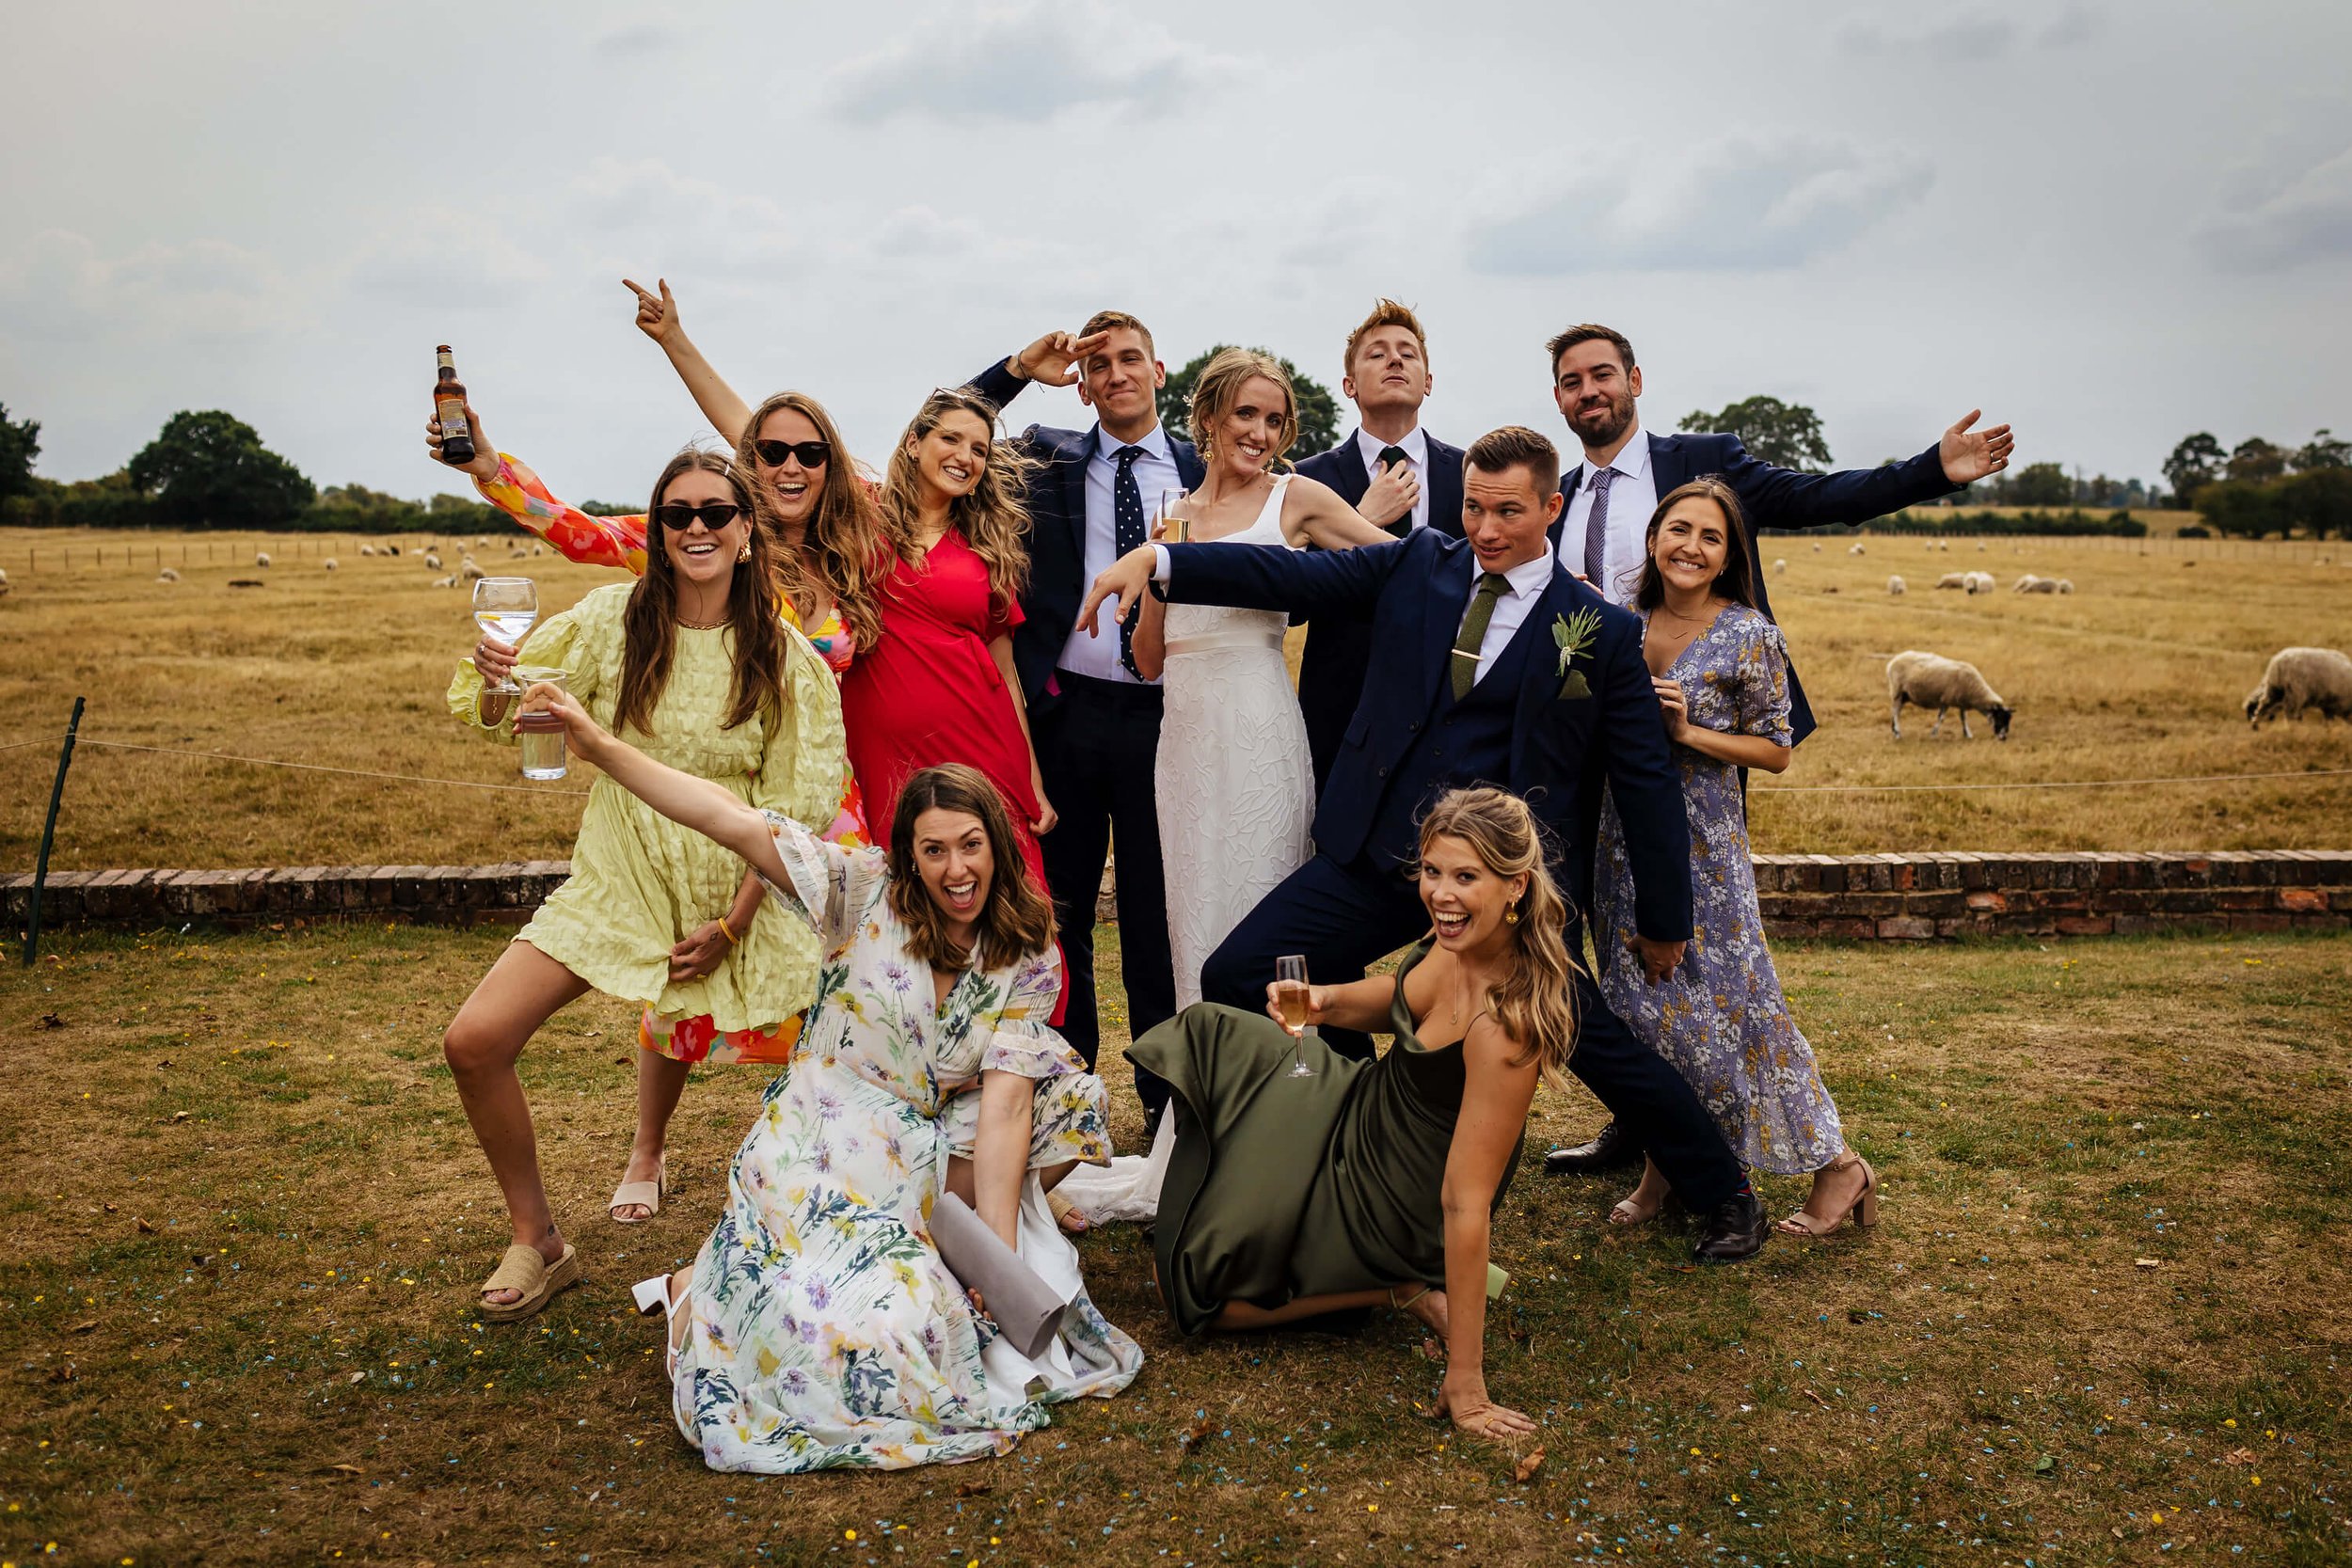 Wedding guests pose for a silly photo at the reception